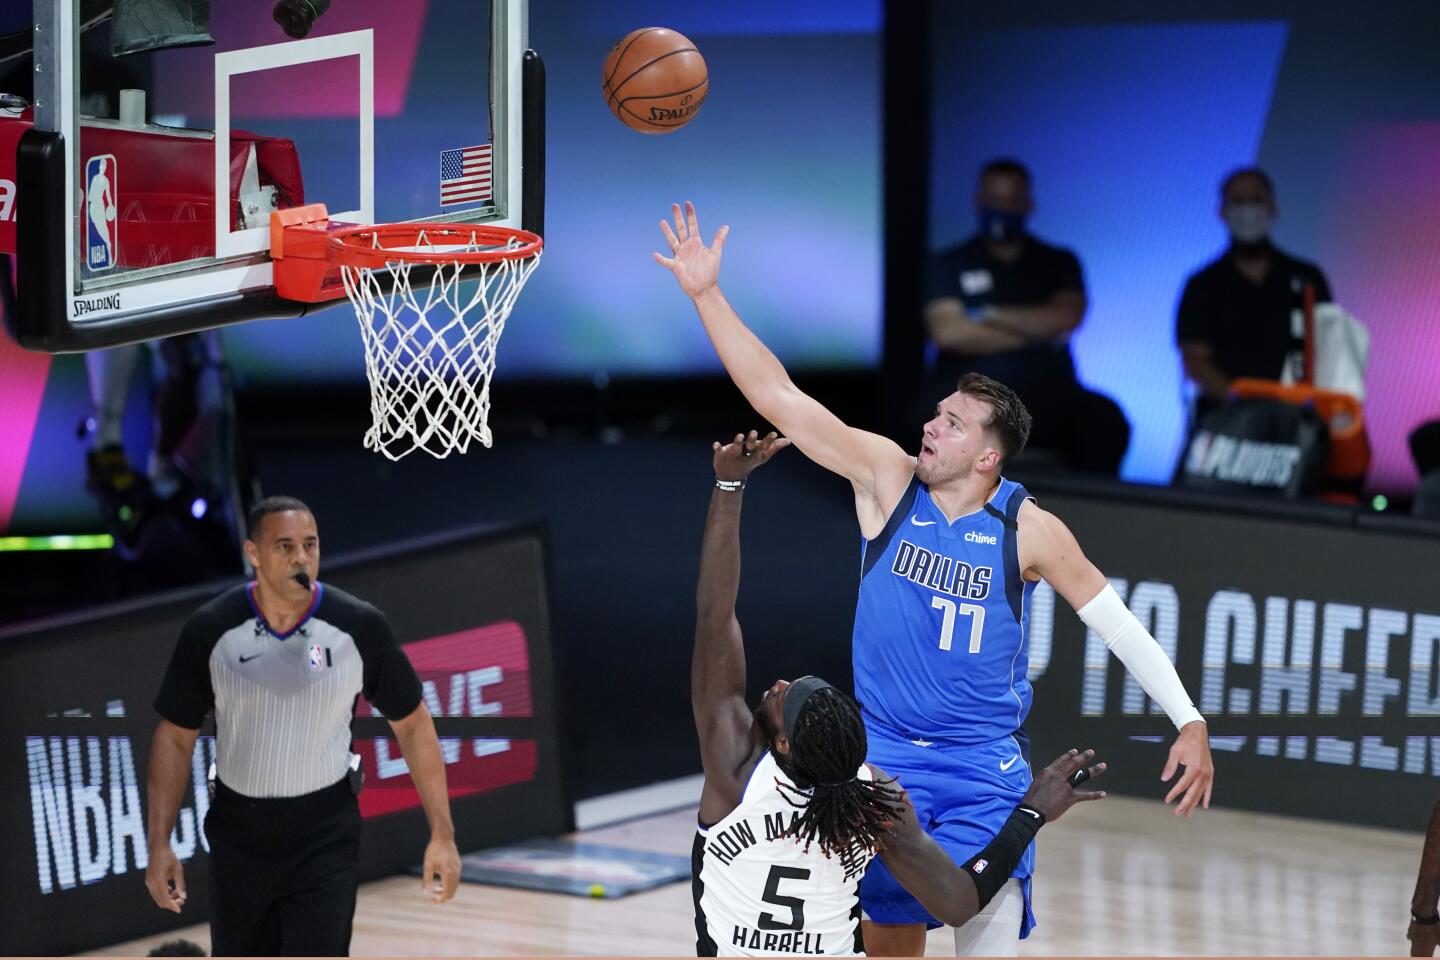 Dallas Mavericks guard Luka Doncic shoots over Clippers forward Montrezl Harrell during Game 3.